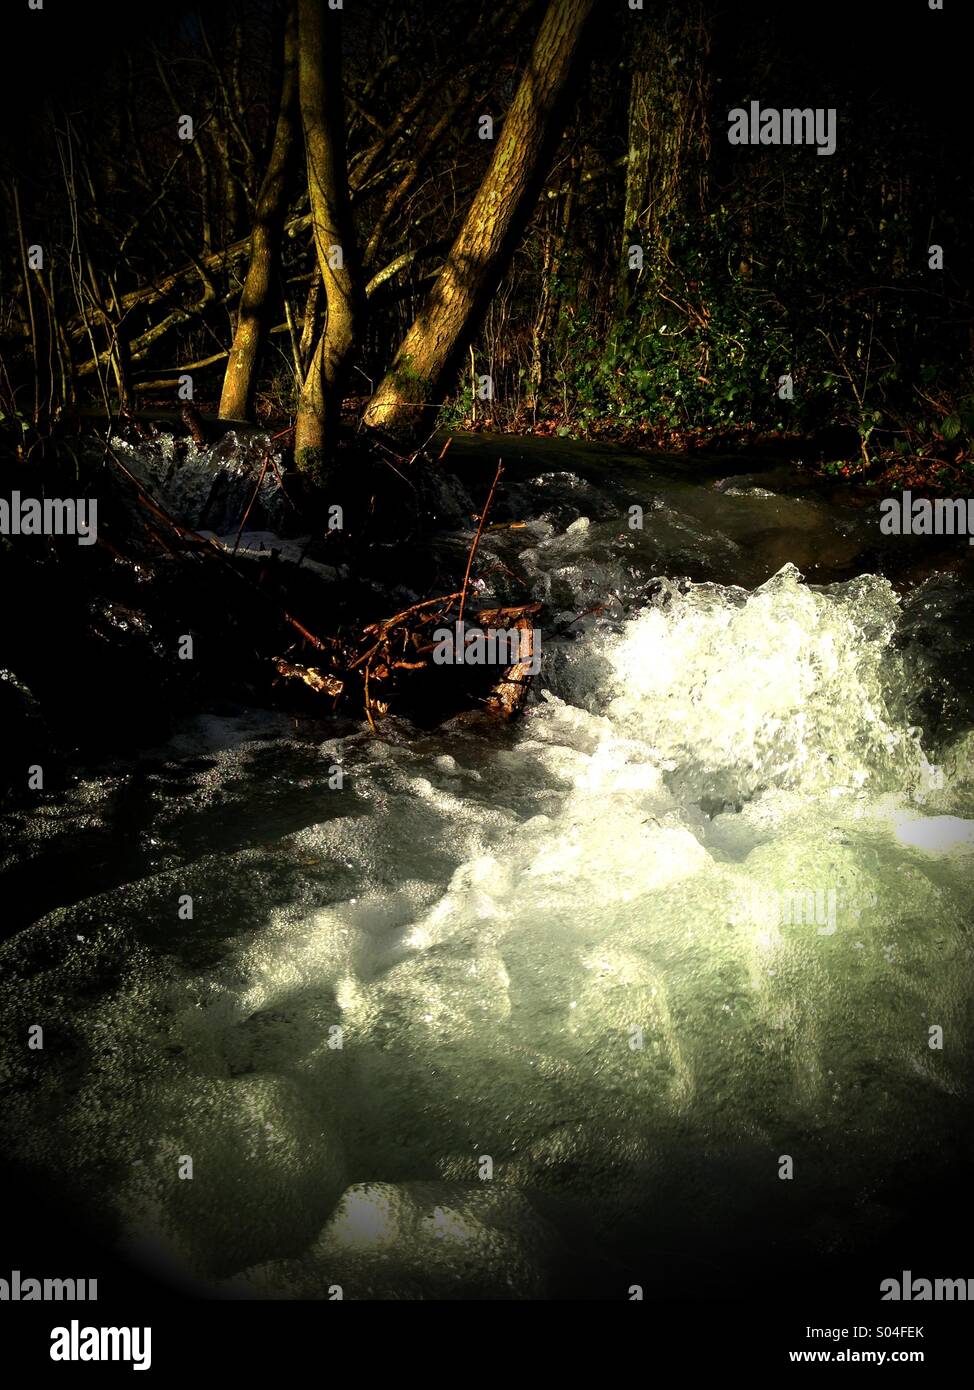 Rushing water: stream with high water levels in winter sun. Stock Photo